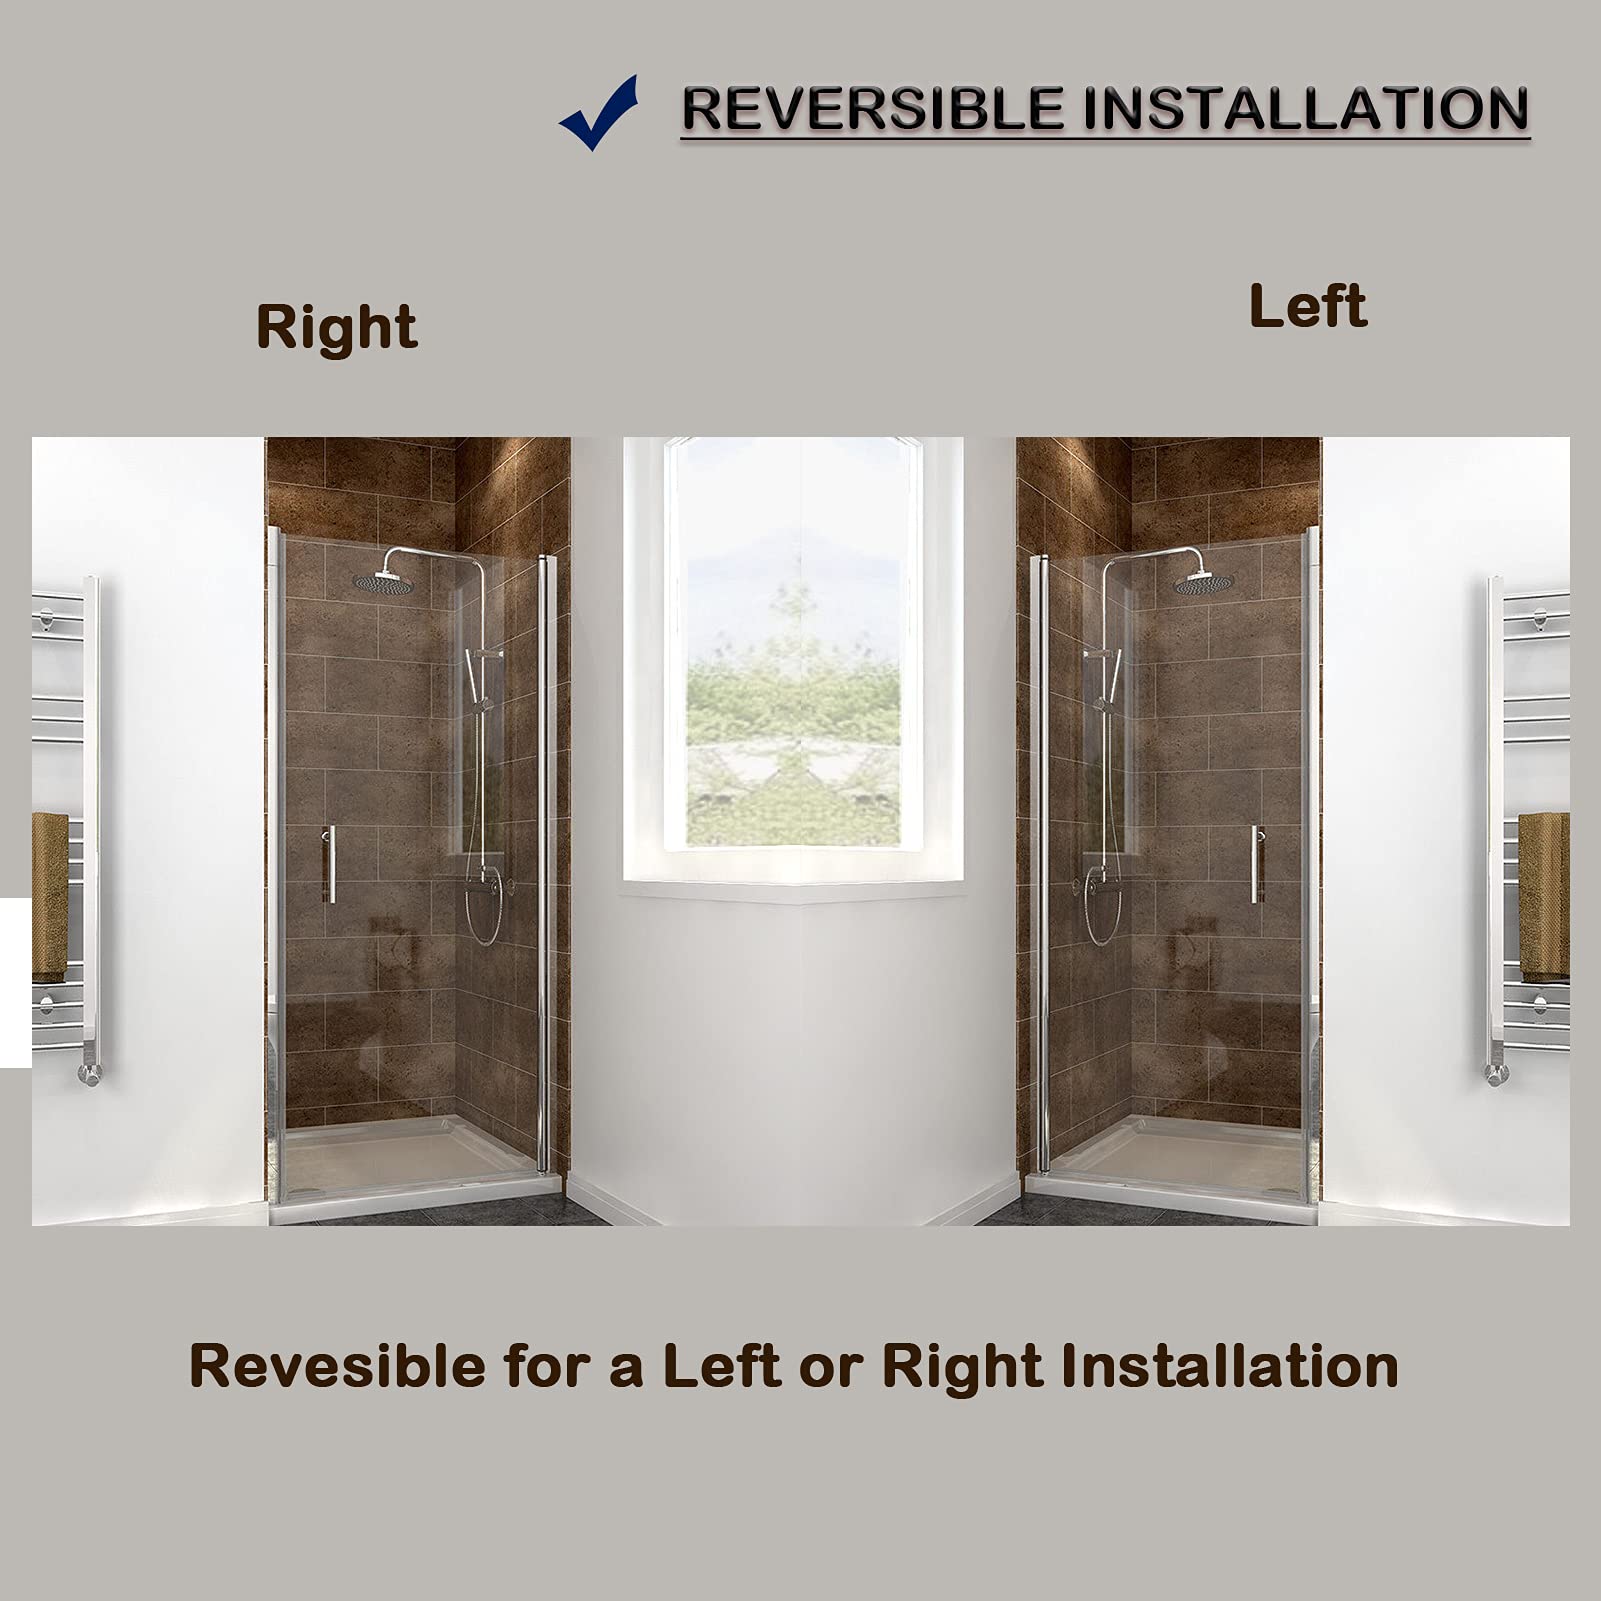 Reversible for a right or left door opening to fit your specific layout.